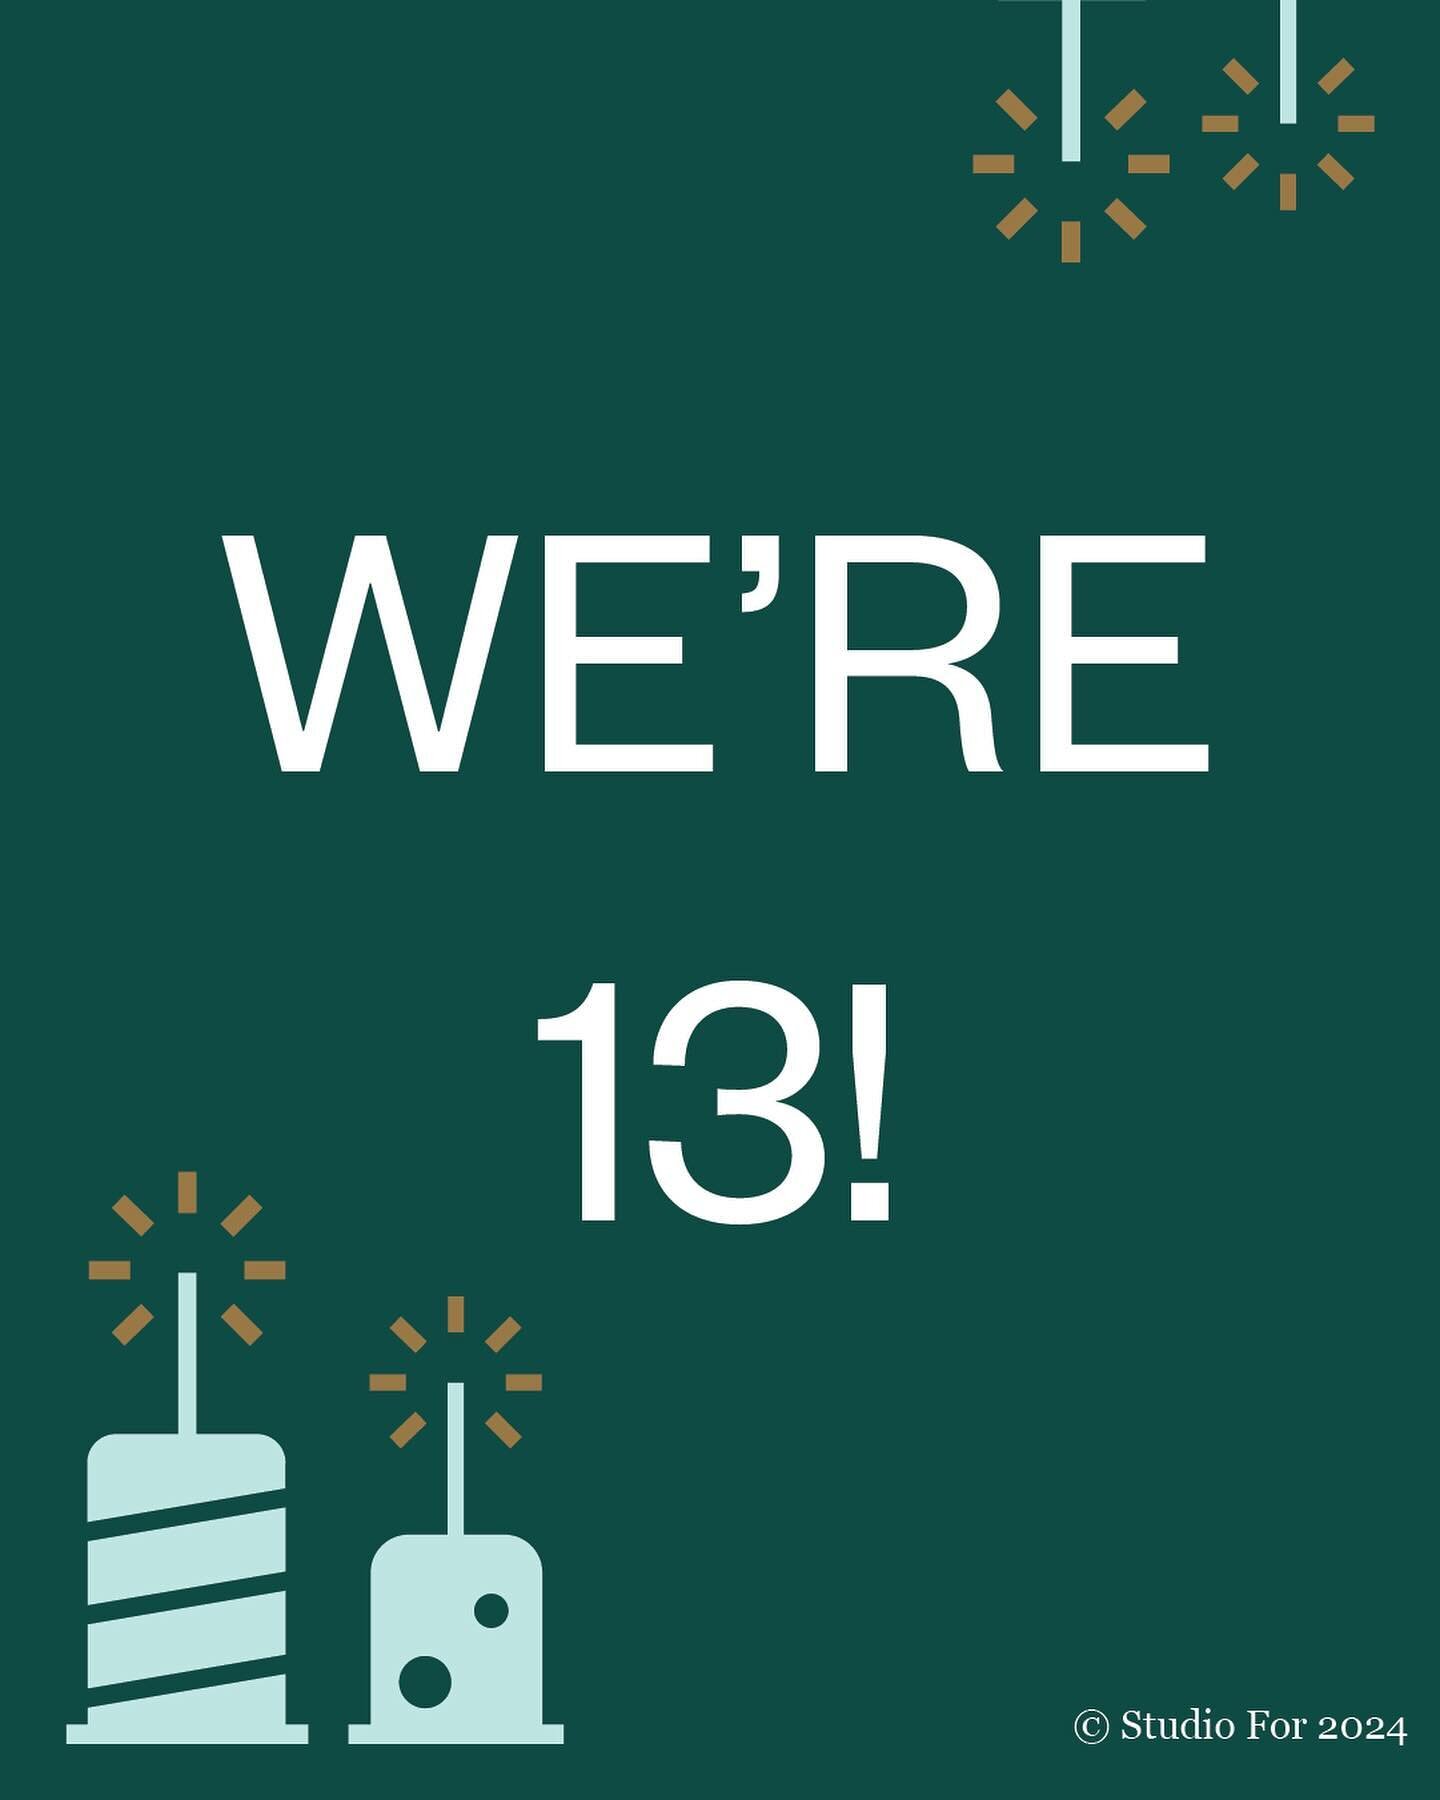 Happy birthday to us! Our studio is 13 years old today and we&rsquo;re celebrating over 87 projects under our belt - 55 in New York State alone and the rest across 10 US states and 13 countries worldwide! 

We&rsquo;re also sending out gratitude to a